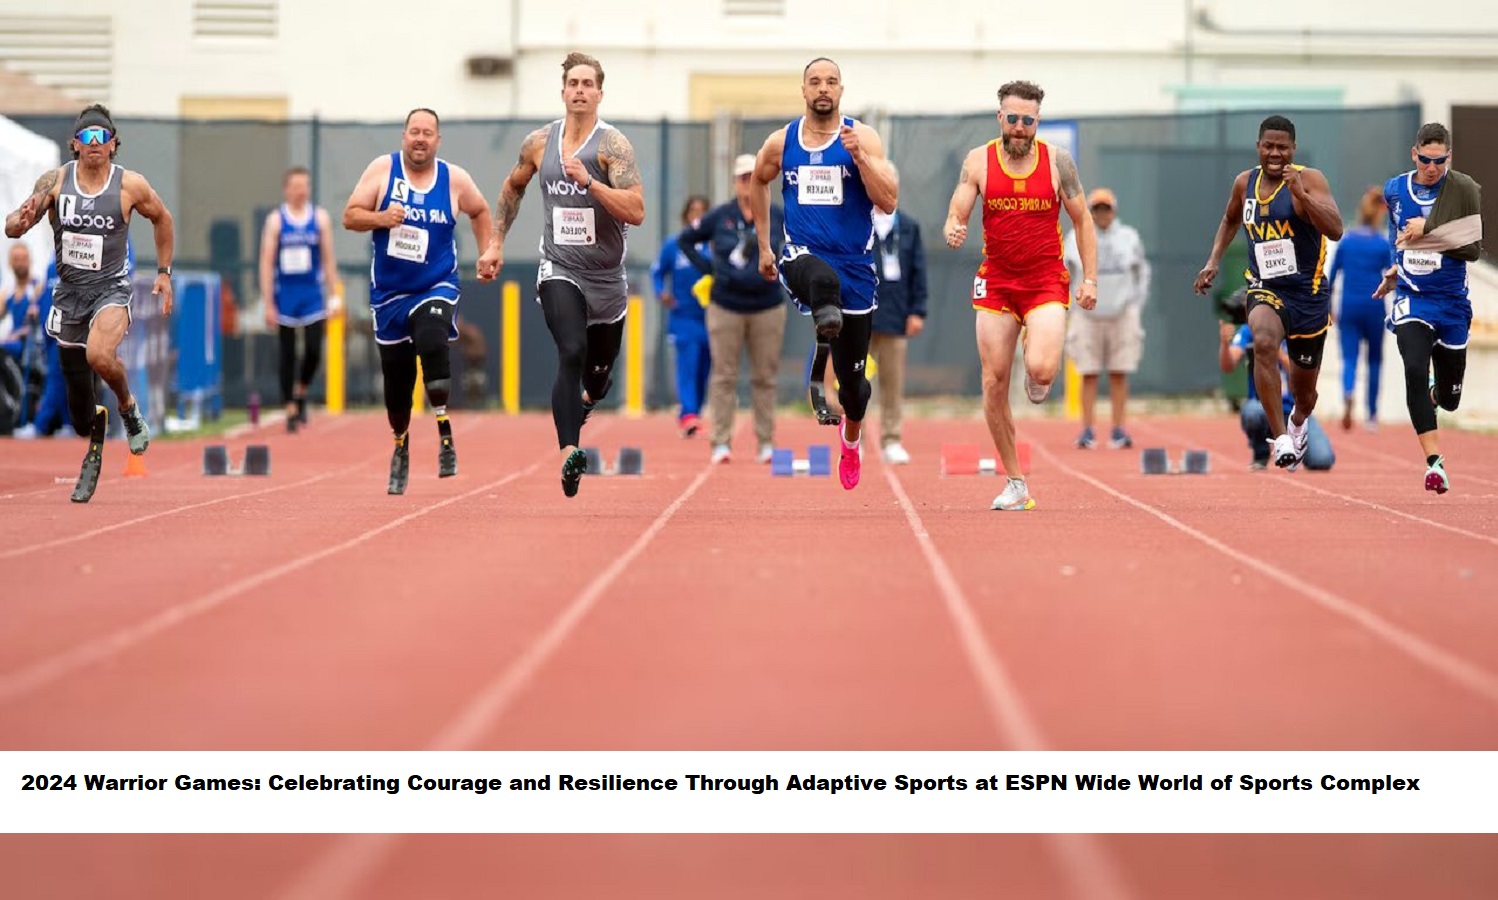 2024 Warrior Games Celebrating Courage and Resilience Through Adaptive Sports at ESPN Wide World of Sports Complex